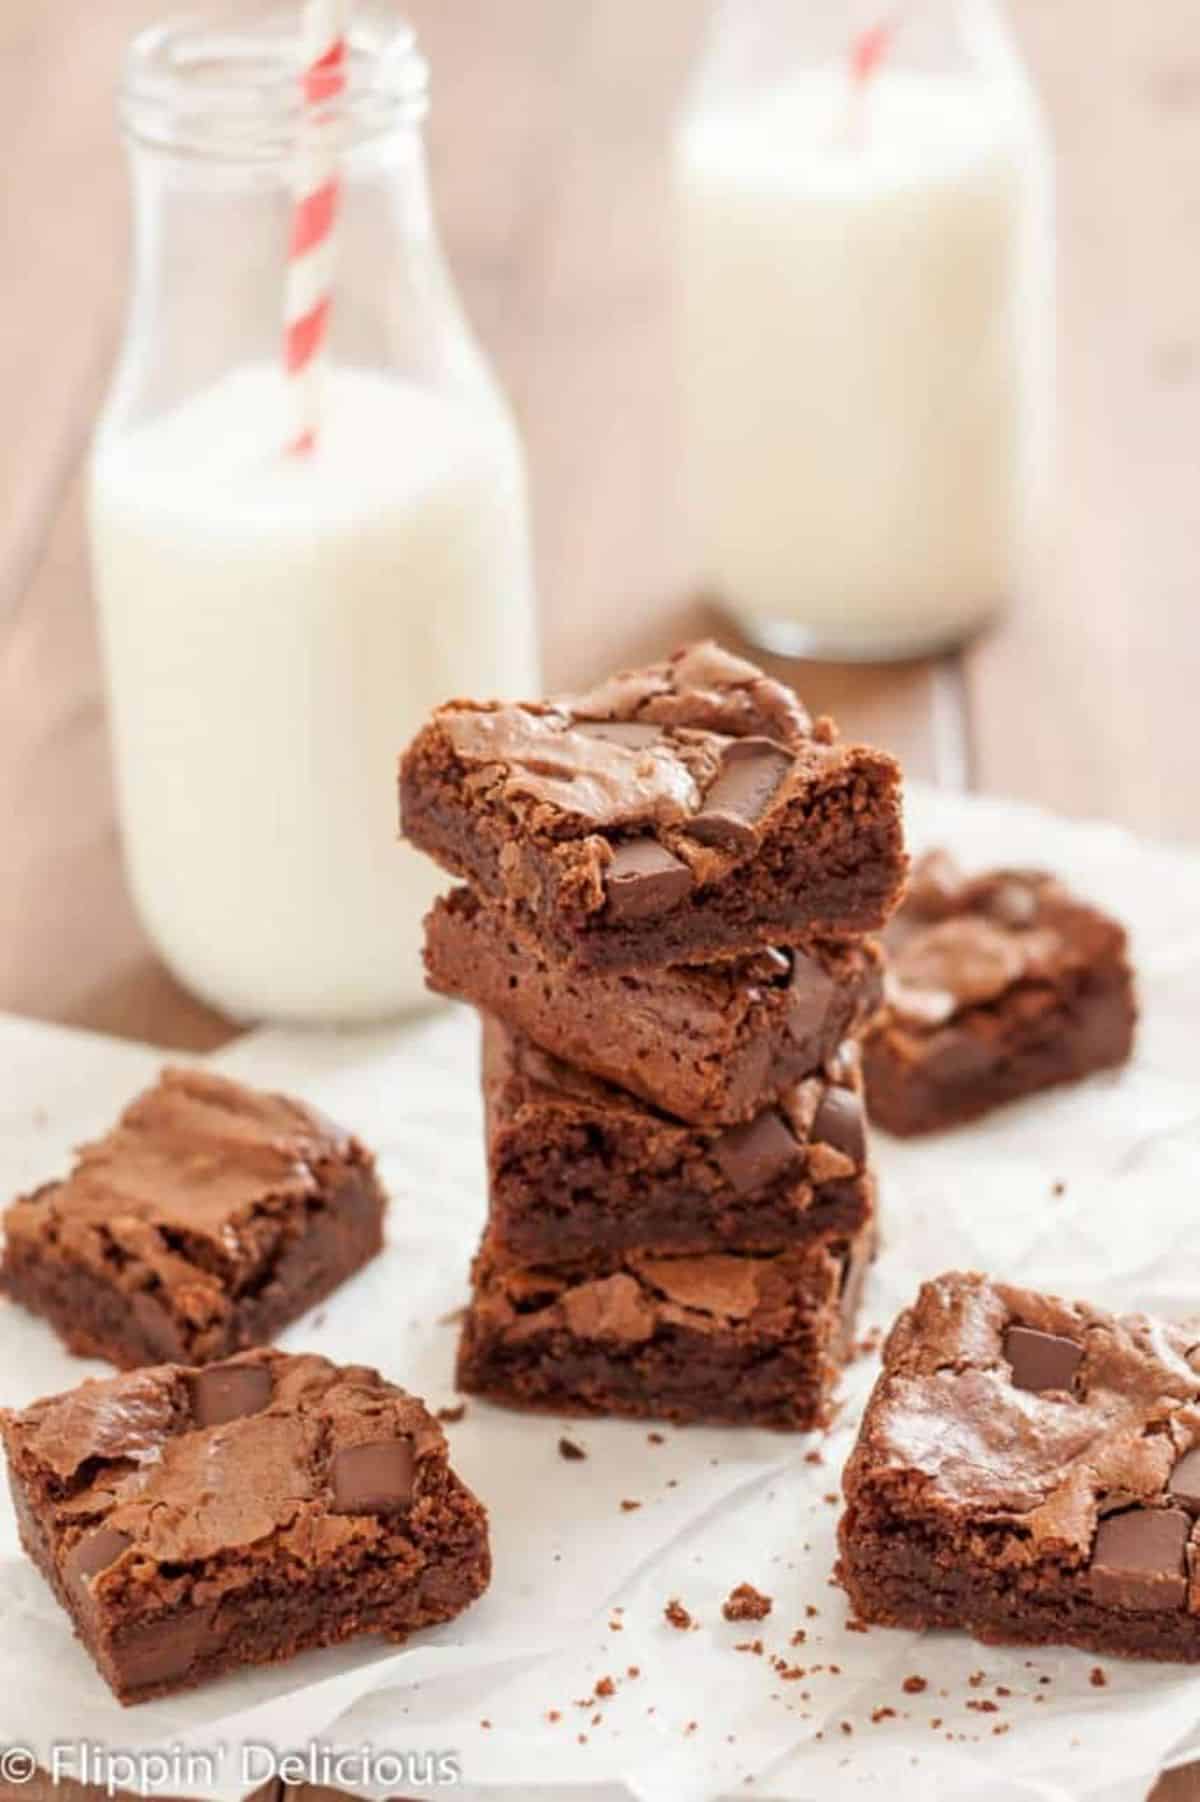 A pile of delicious Almond Flour Brownies on a table.